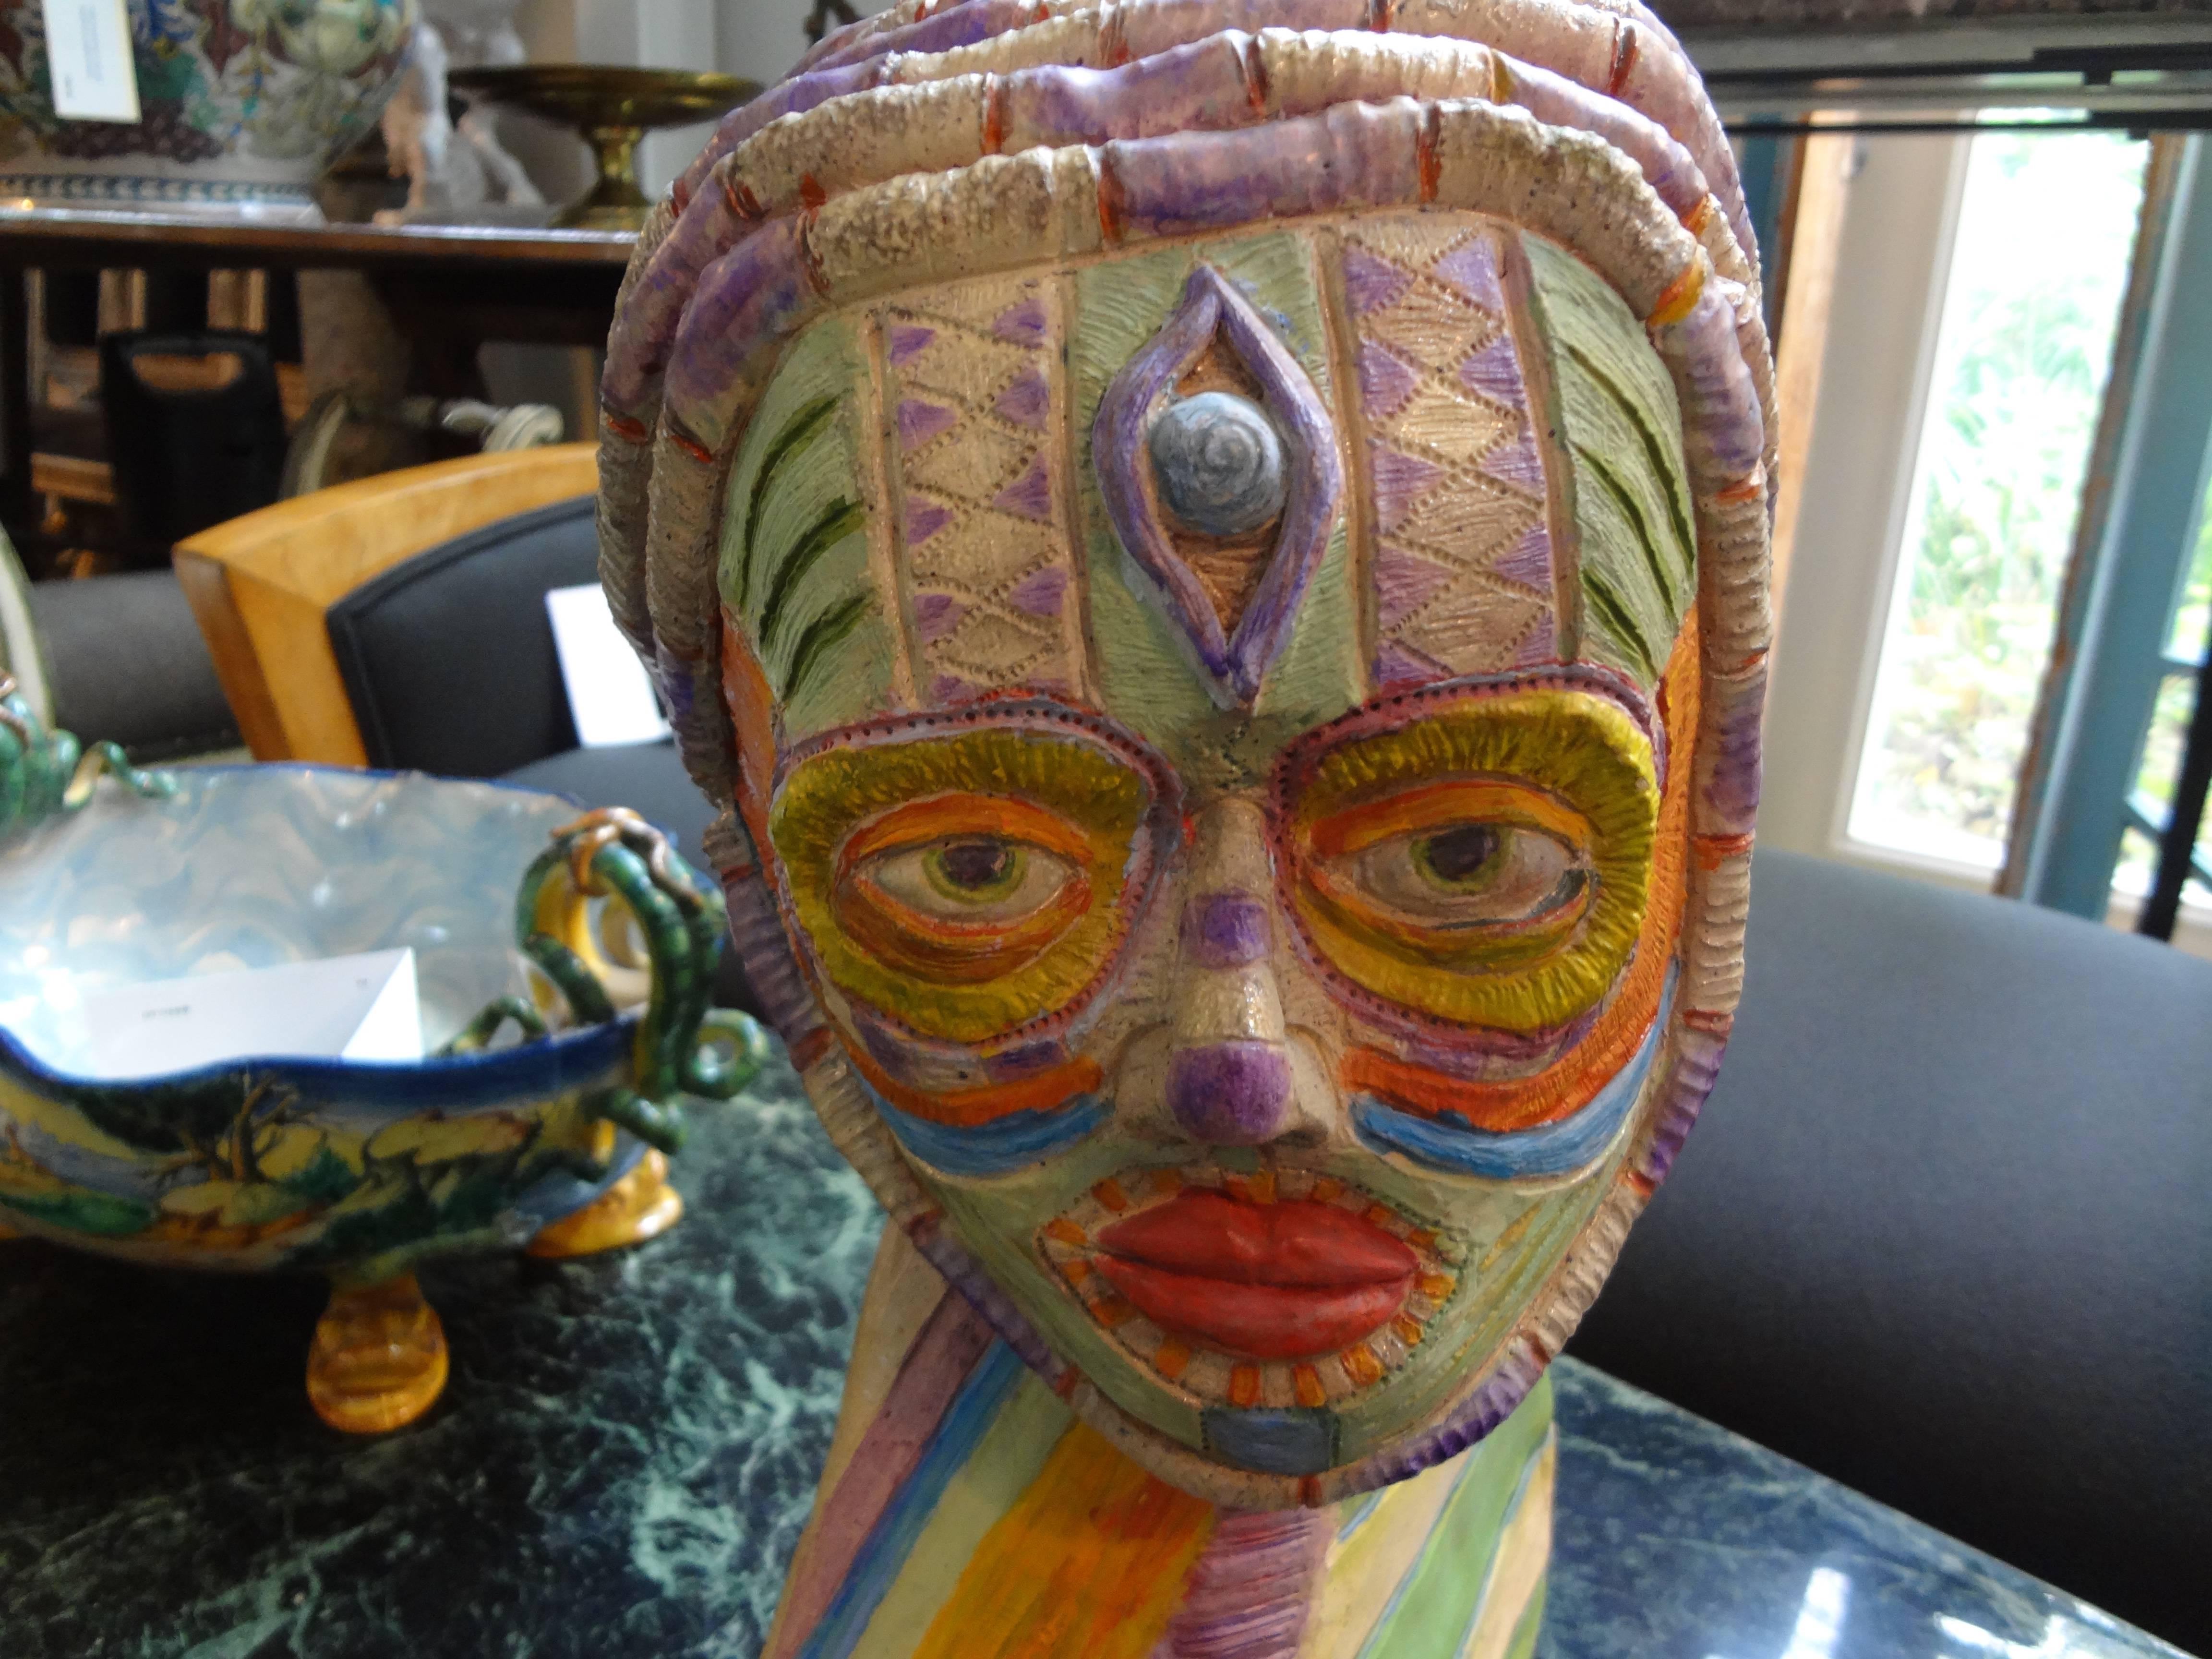 Tribal style clay bust sculpture.
Unusual tribal style / African style artist clay bust from the 20th century. This unique colorful artist sculpture depicts a tribal figure.